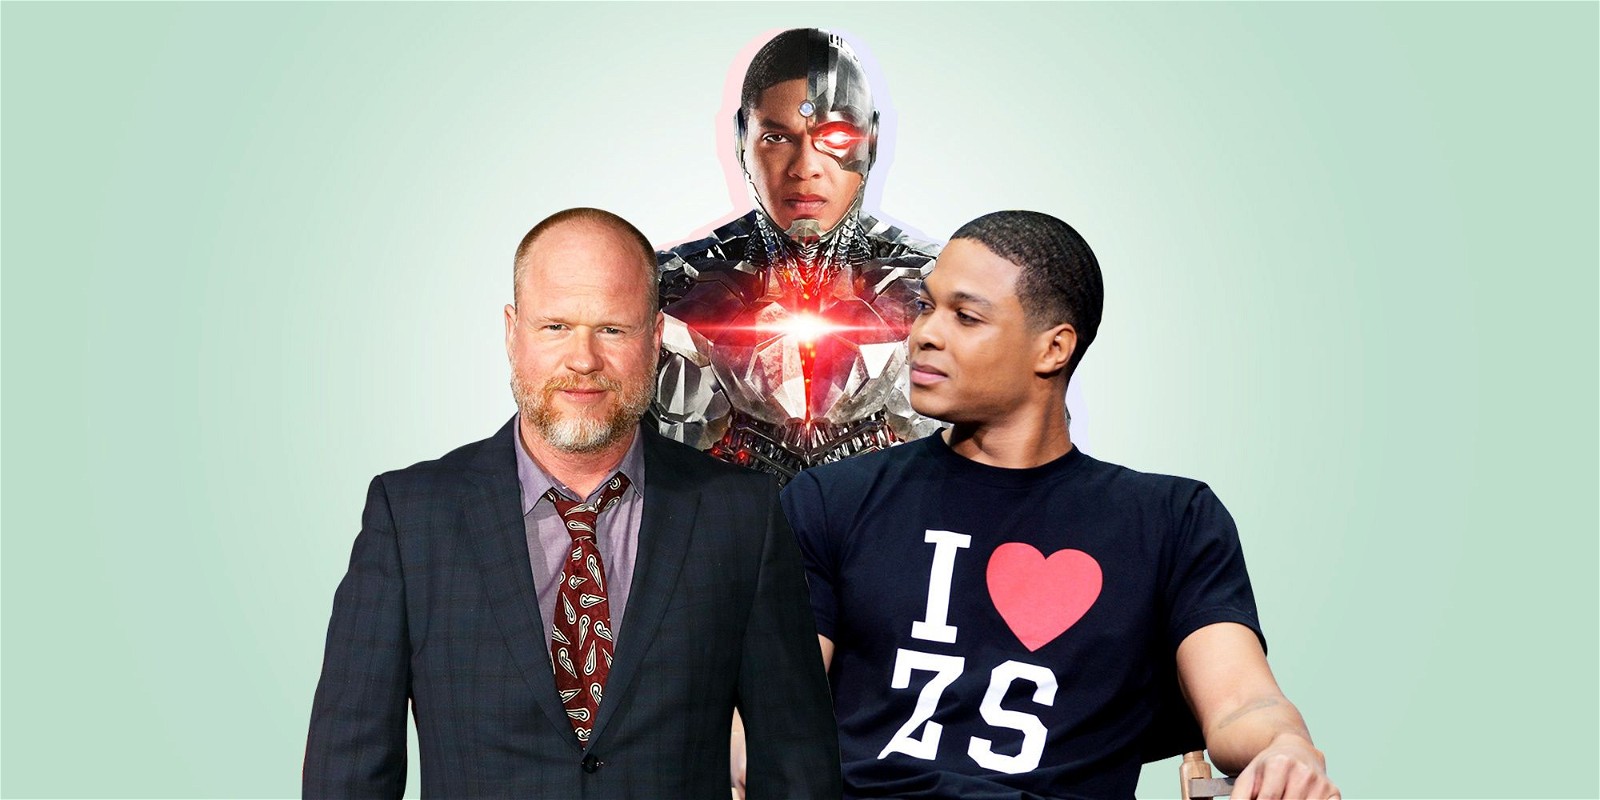 Ray Fisher stands against Joss Whedon and former DC Films management